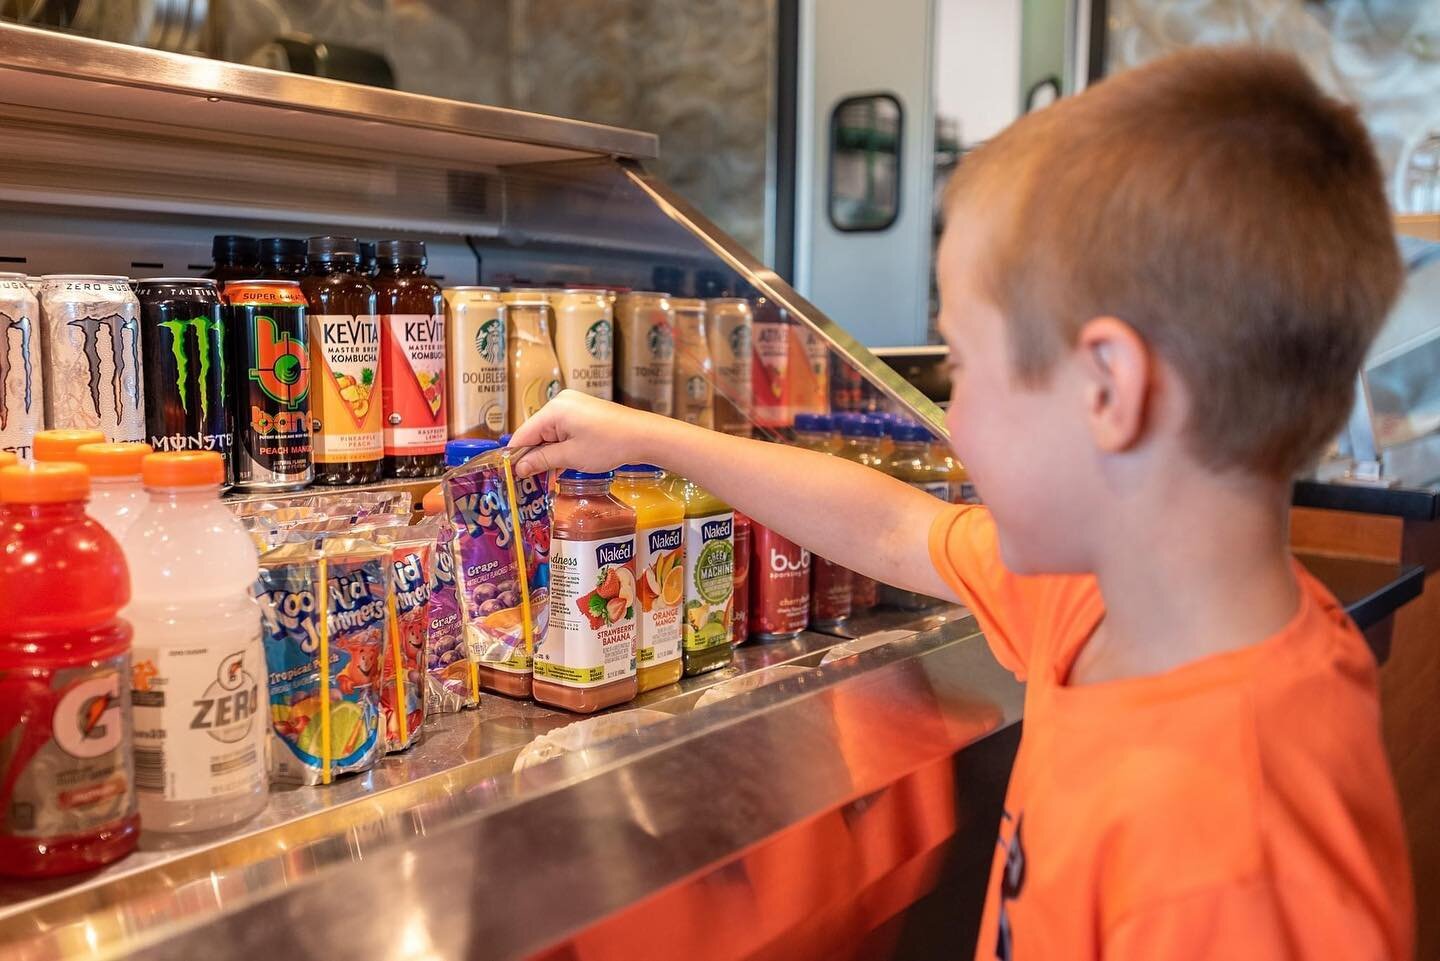 We have a drink for everyone&rsquo;s taste&hellip; even the kiddos! 😎

Stop by this week to check out all we have to offer you and your family! 

#branson #bransoneats #417restaurants #417eats